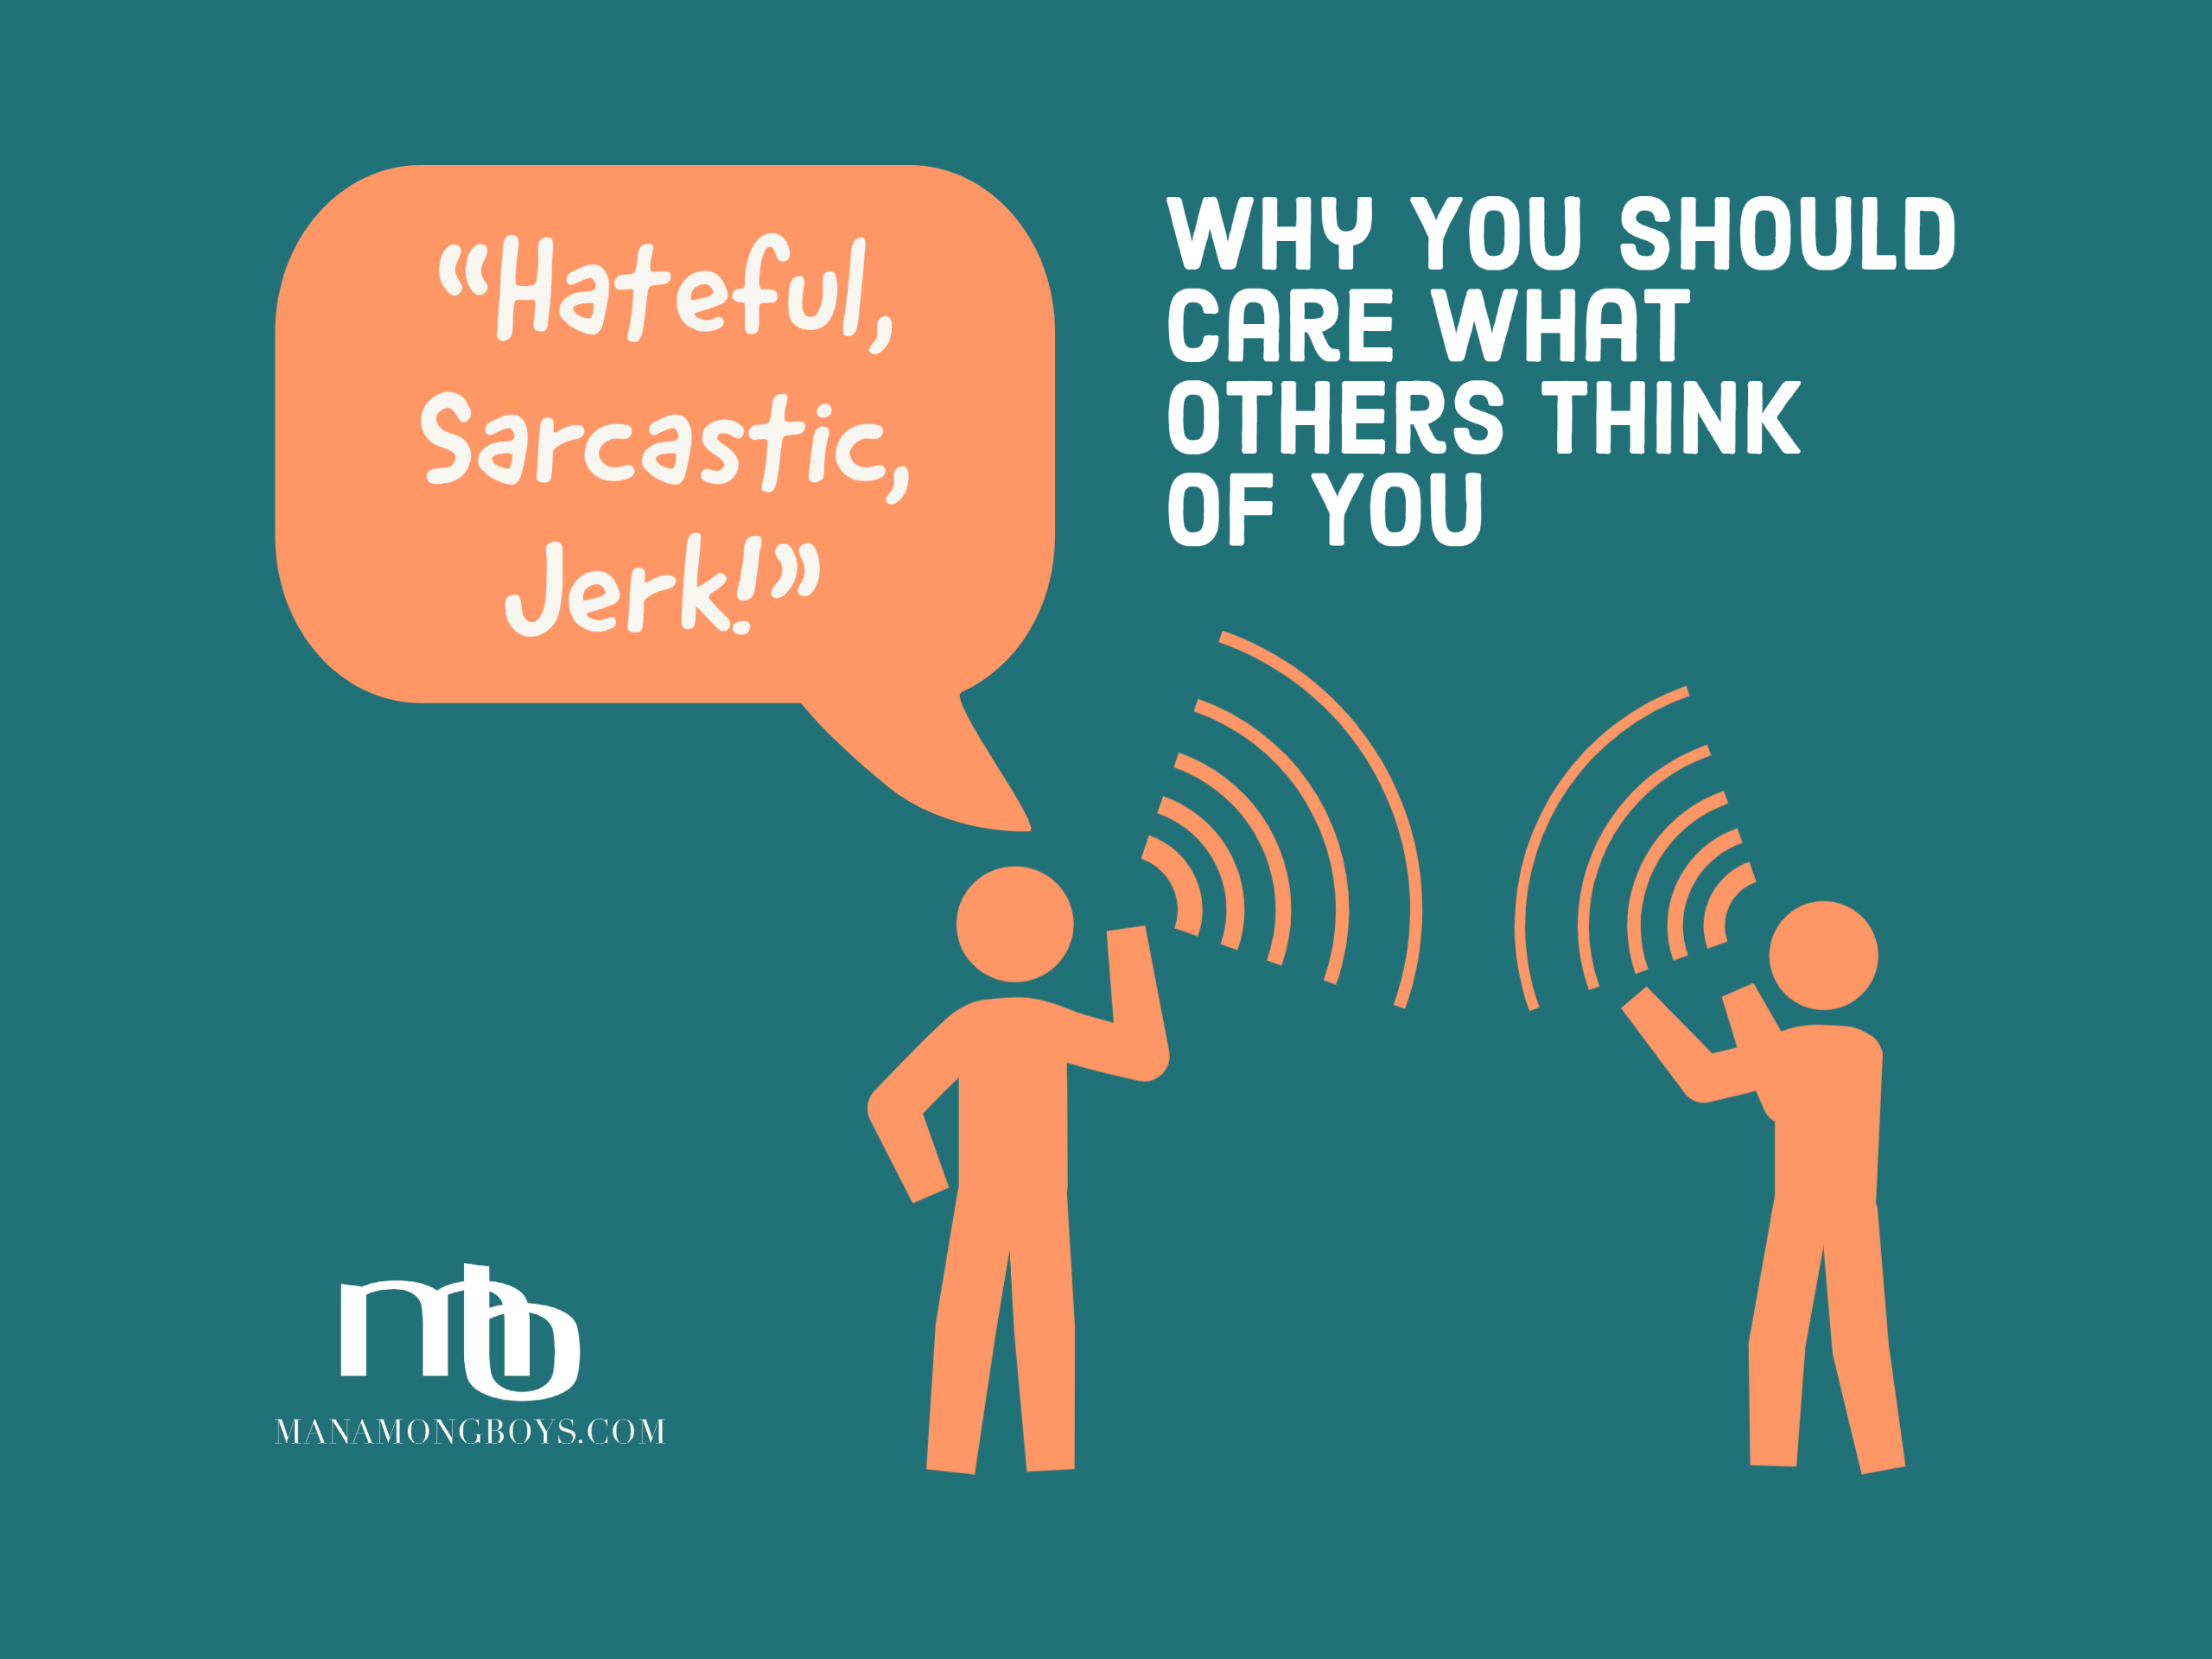 “Hateful, Sarcastic, Jerk!” Why You Should Care What Others Think of ...